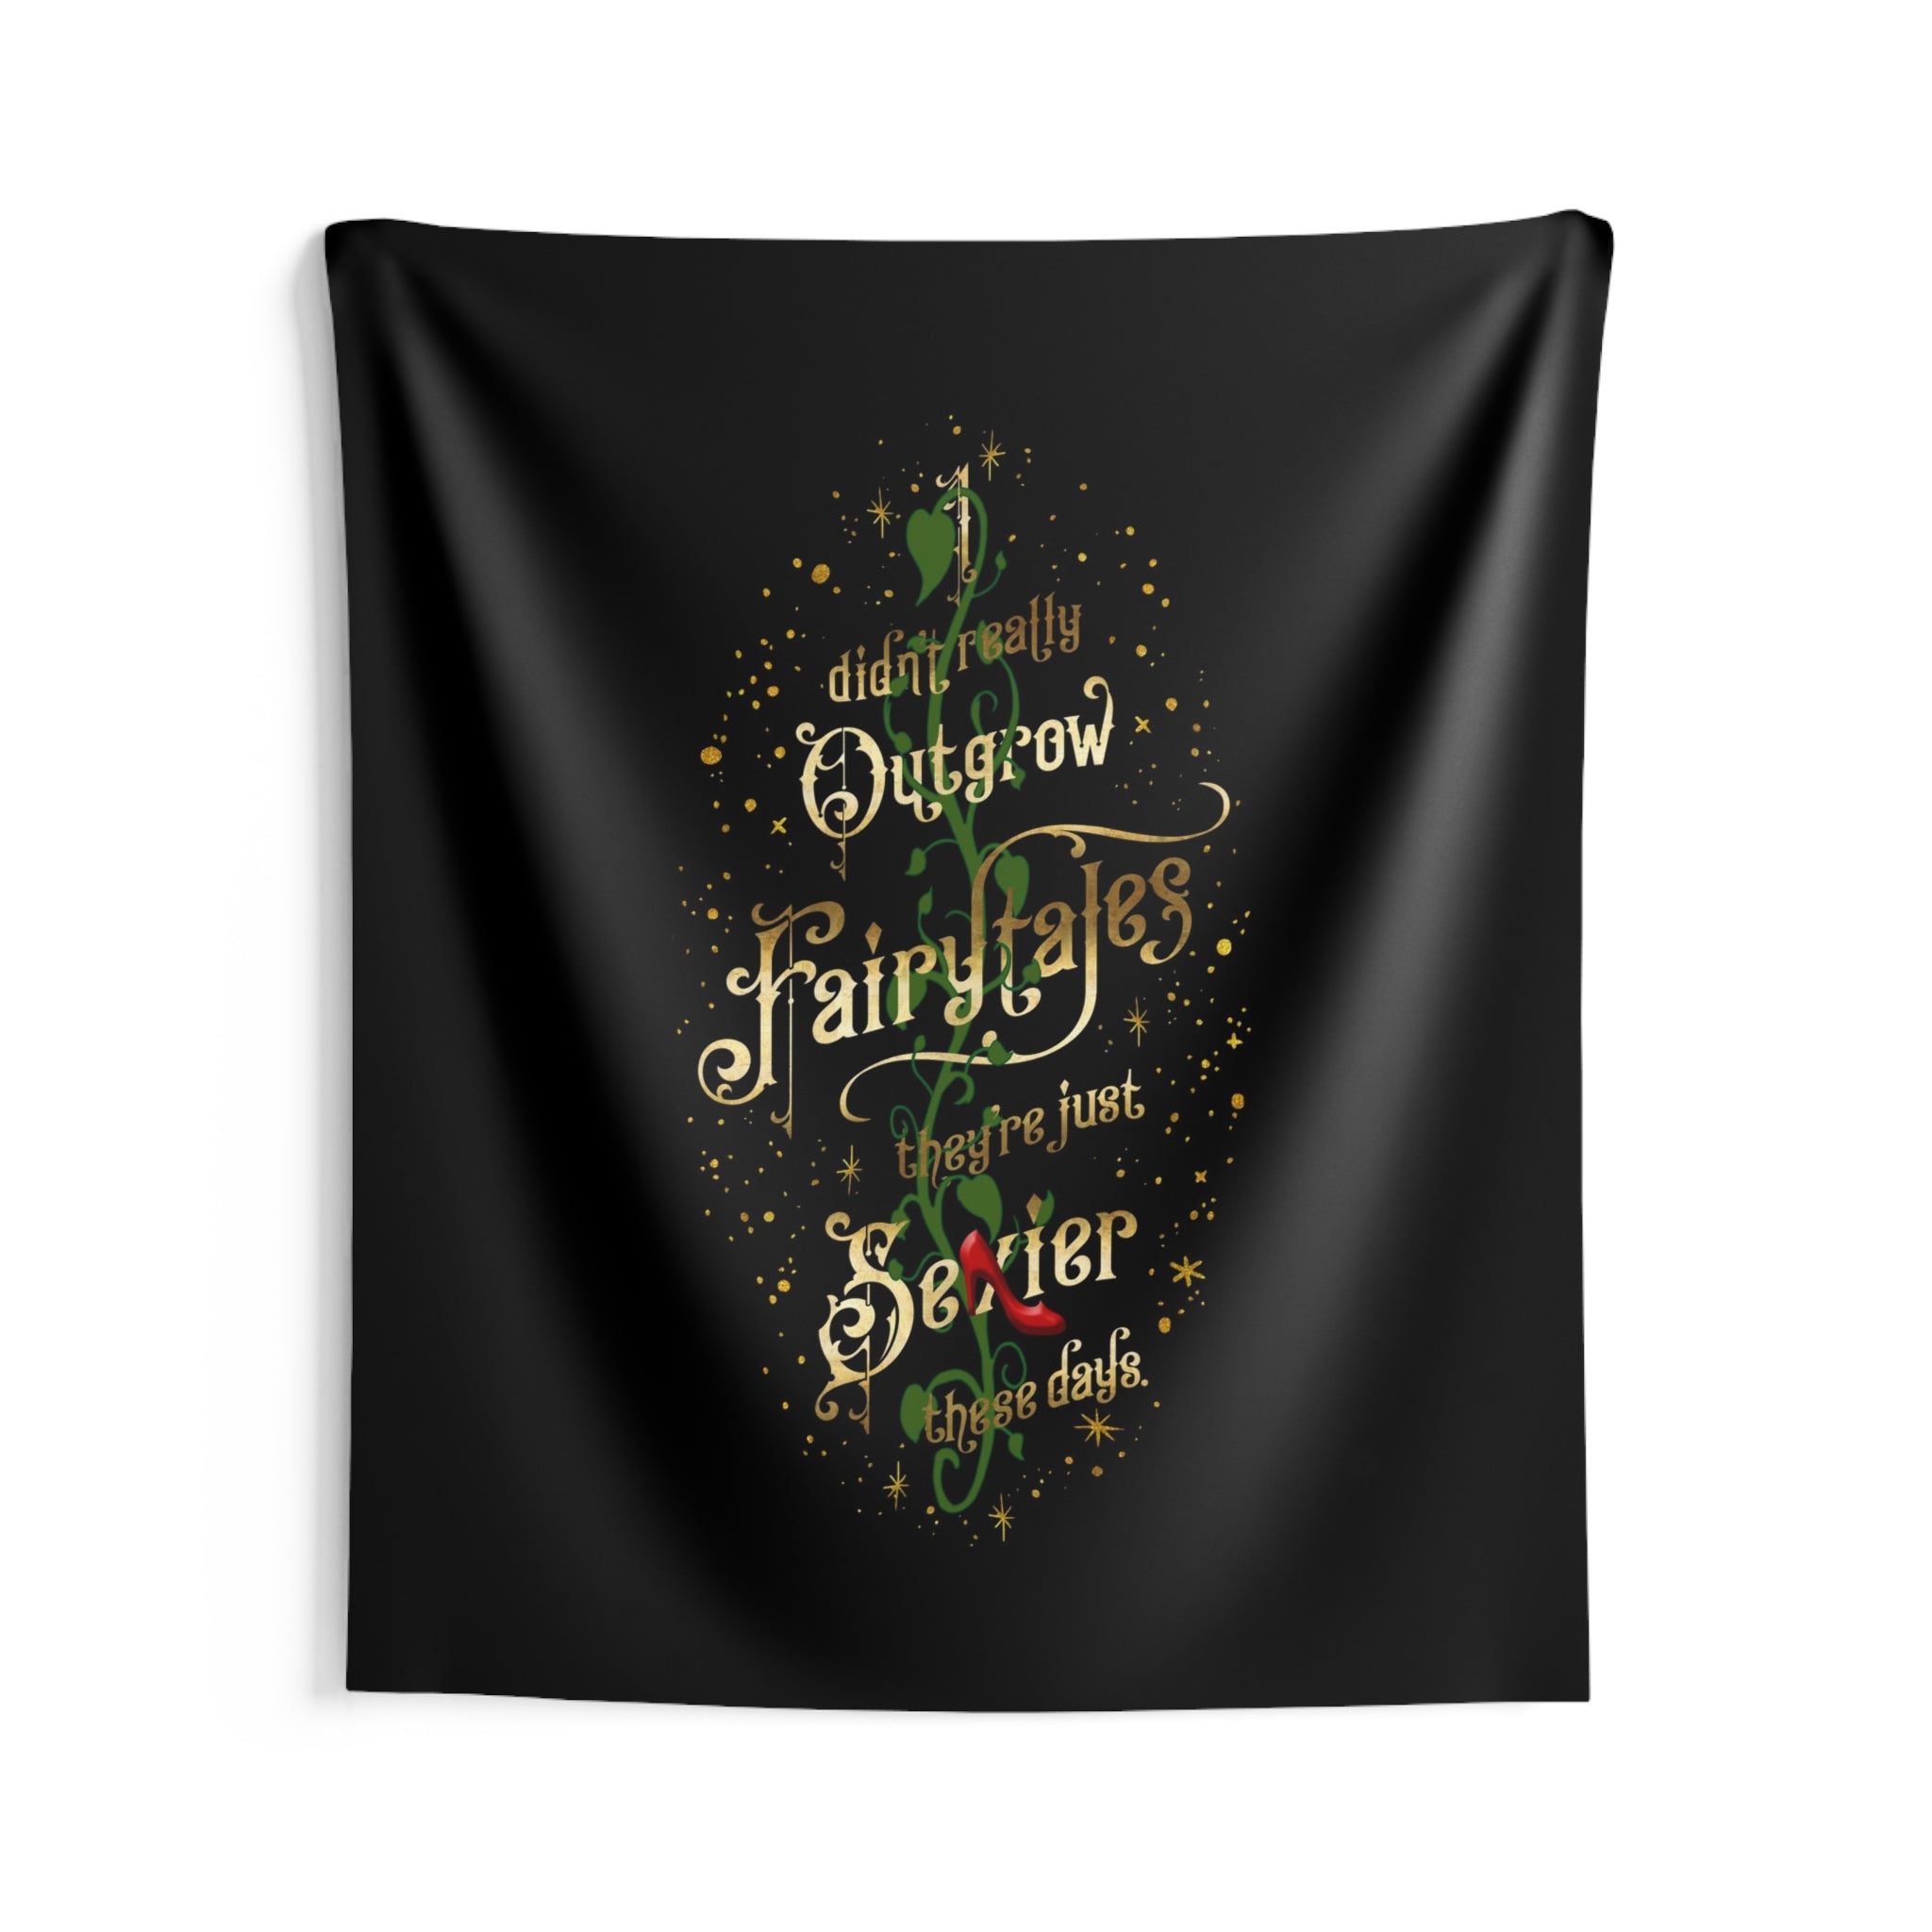 I didn't really outgrow fairytales... Wall Tapestry